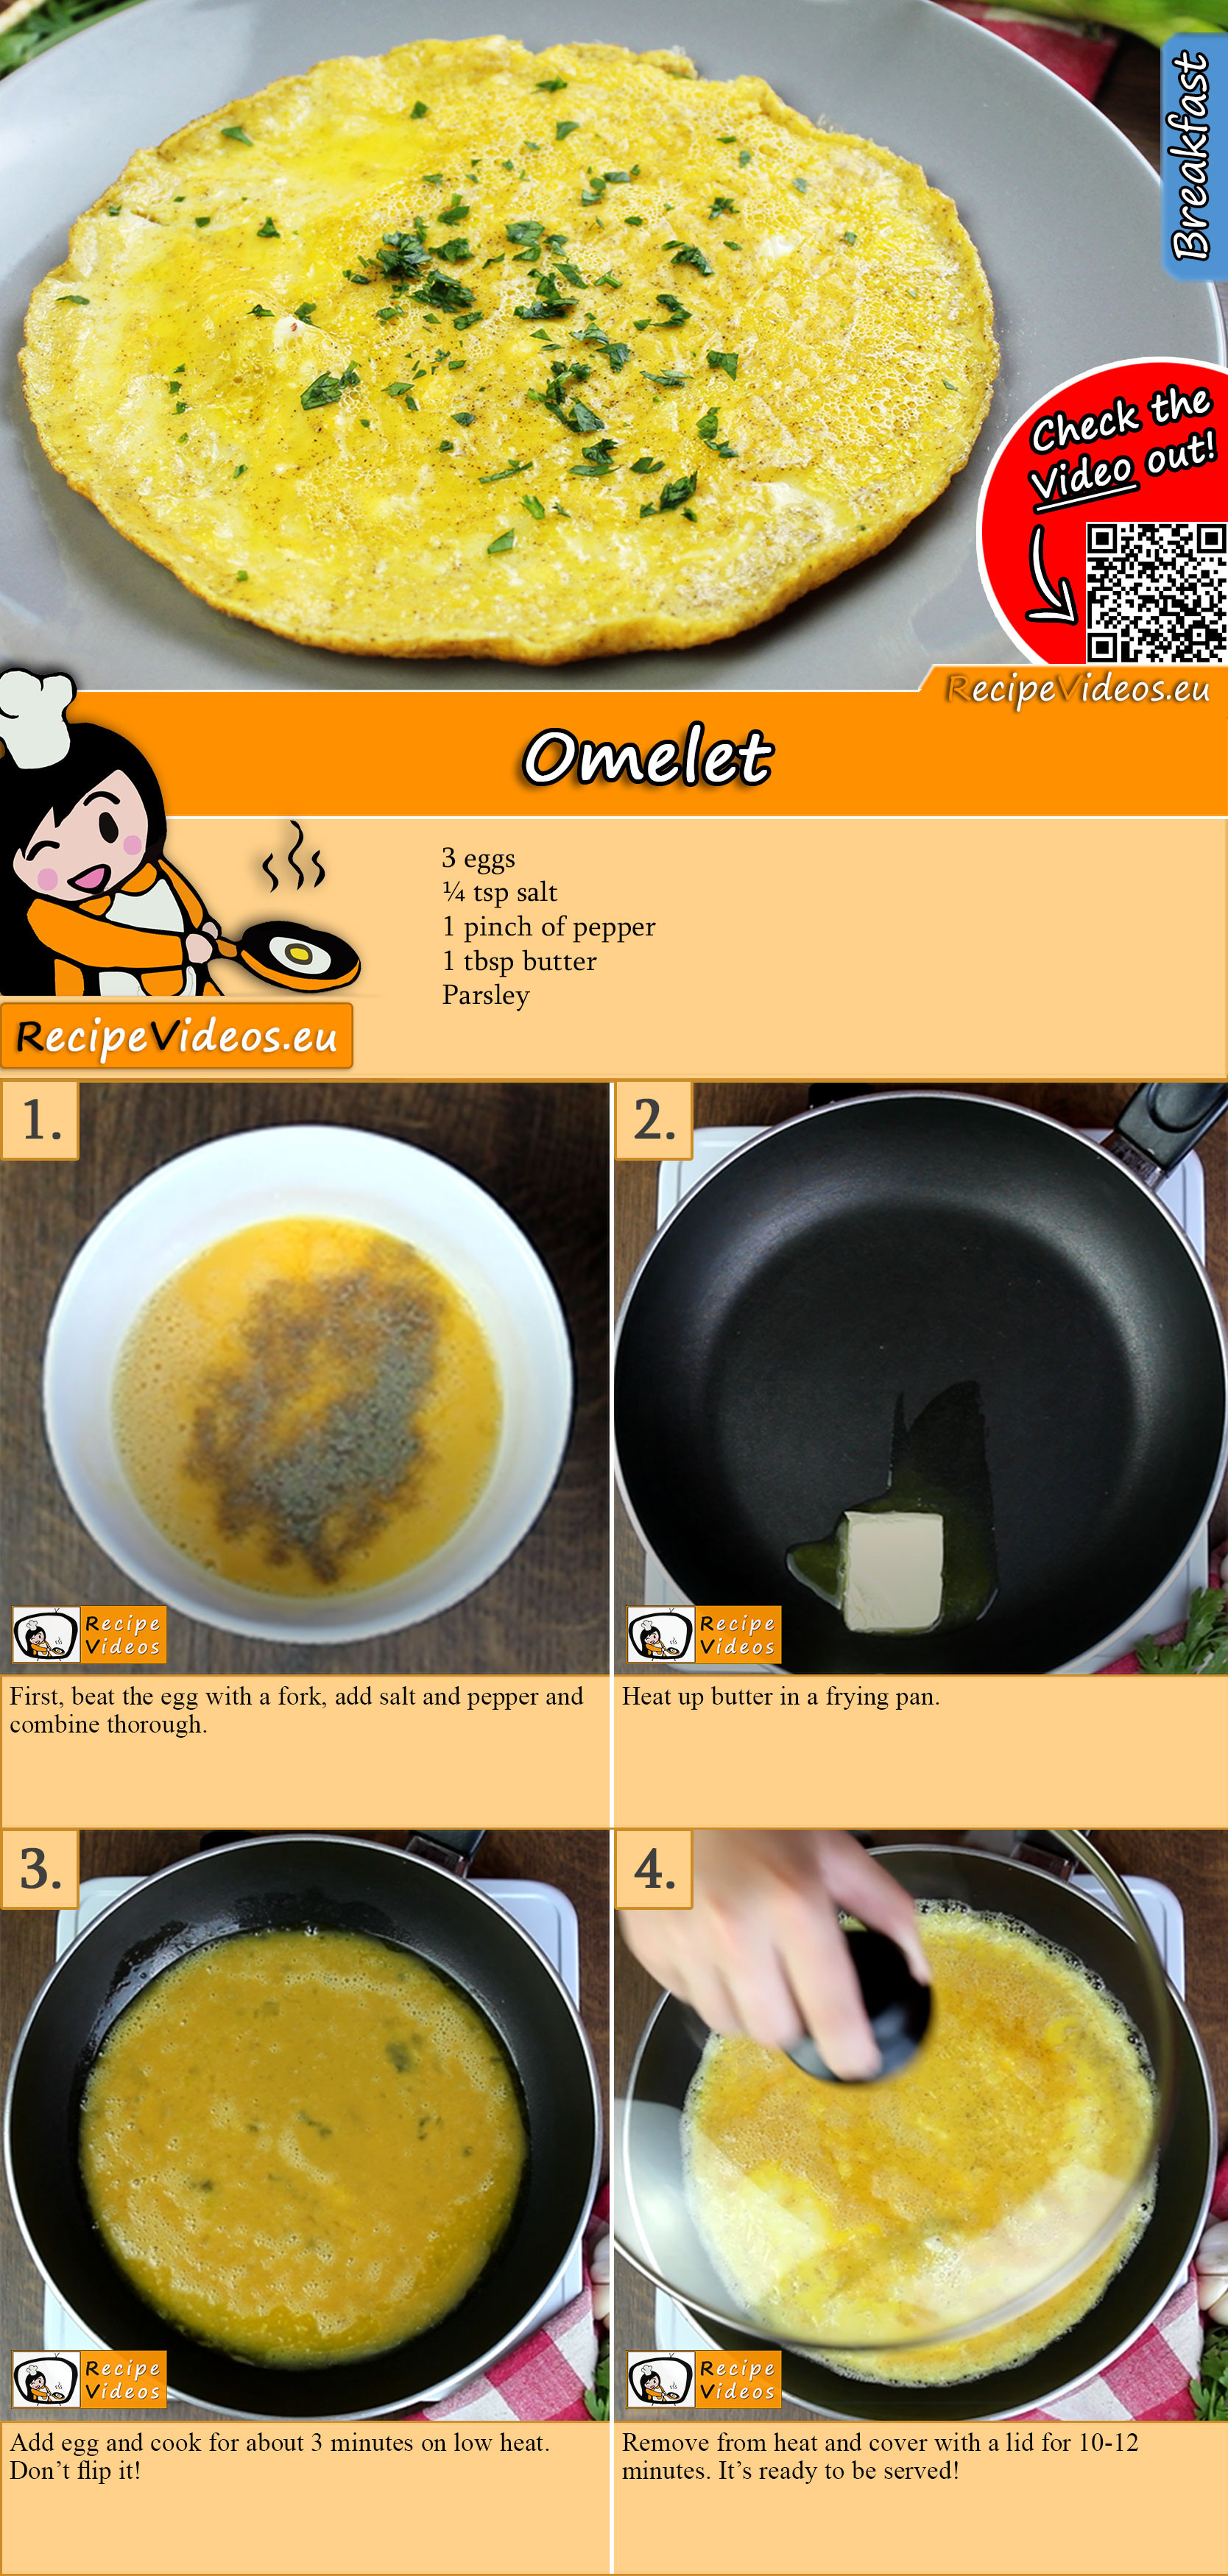 Omelet recipe with video